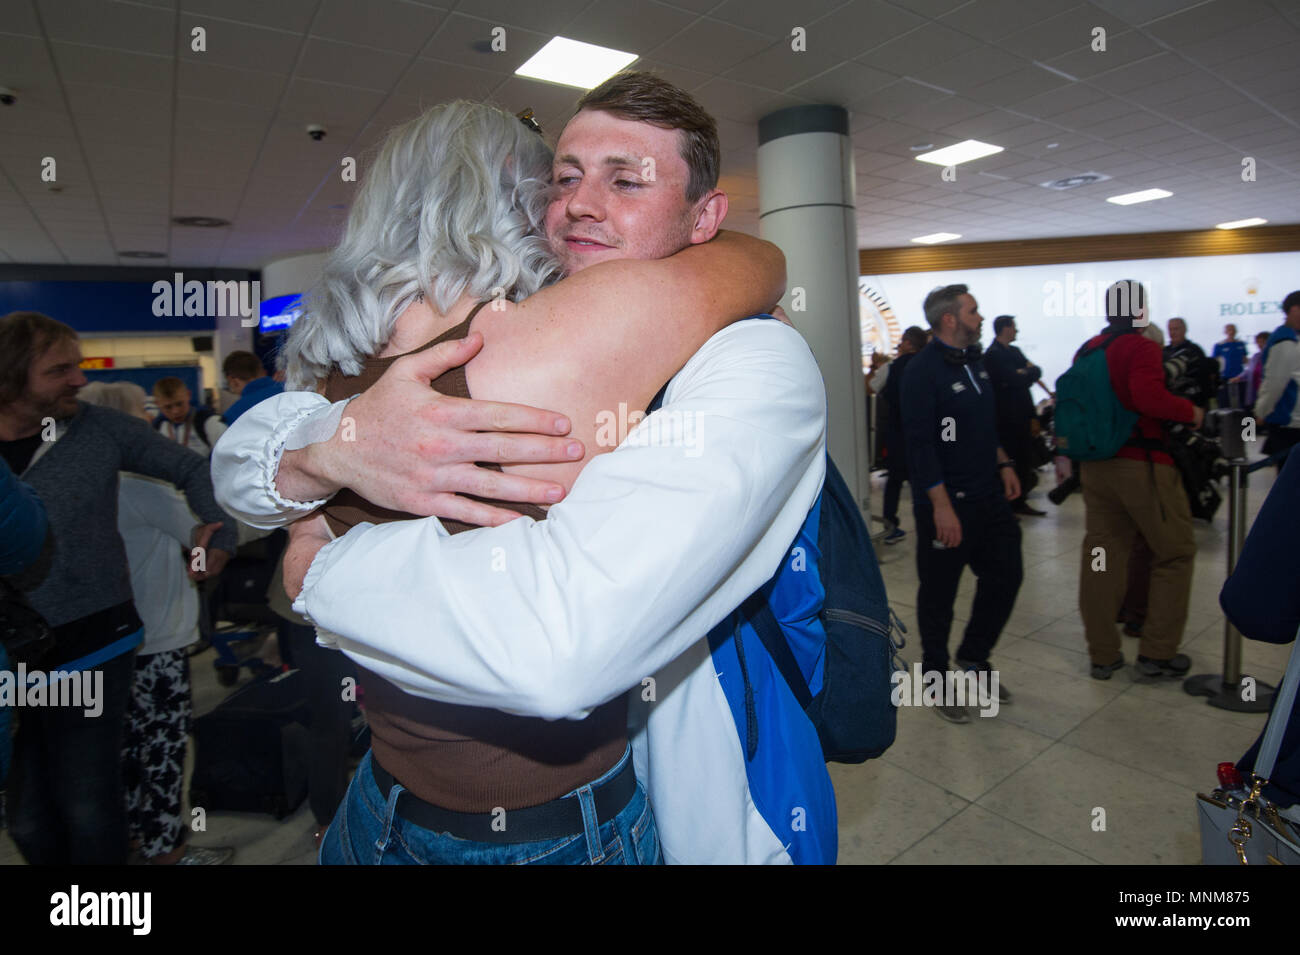 Team Scotland arrive at Glasgow airport after competing in the Gold Coast Commonwealth Games which they achieved 44 medals.  Featuring: Ross Murdoch Where: Glasgow, United Kingdom When: 17 Apr 2018 Credit: Euan Cherry/WENN Stock Photo